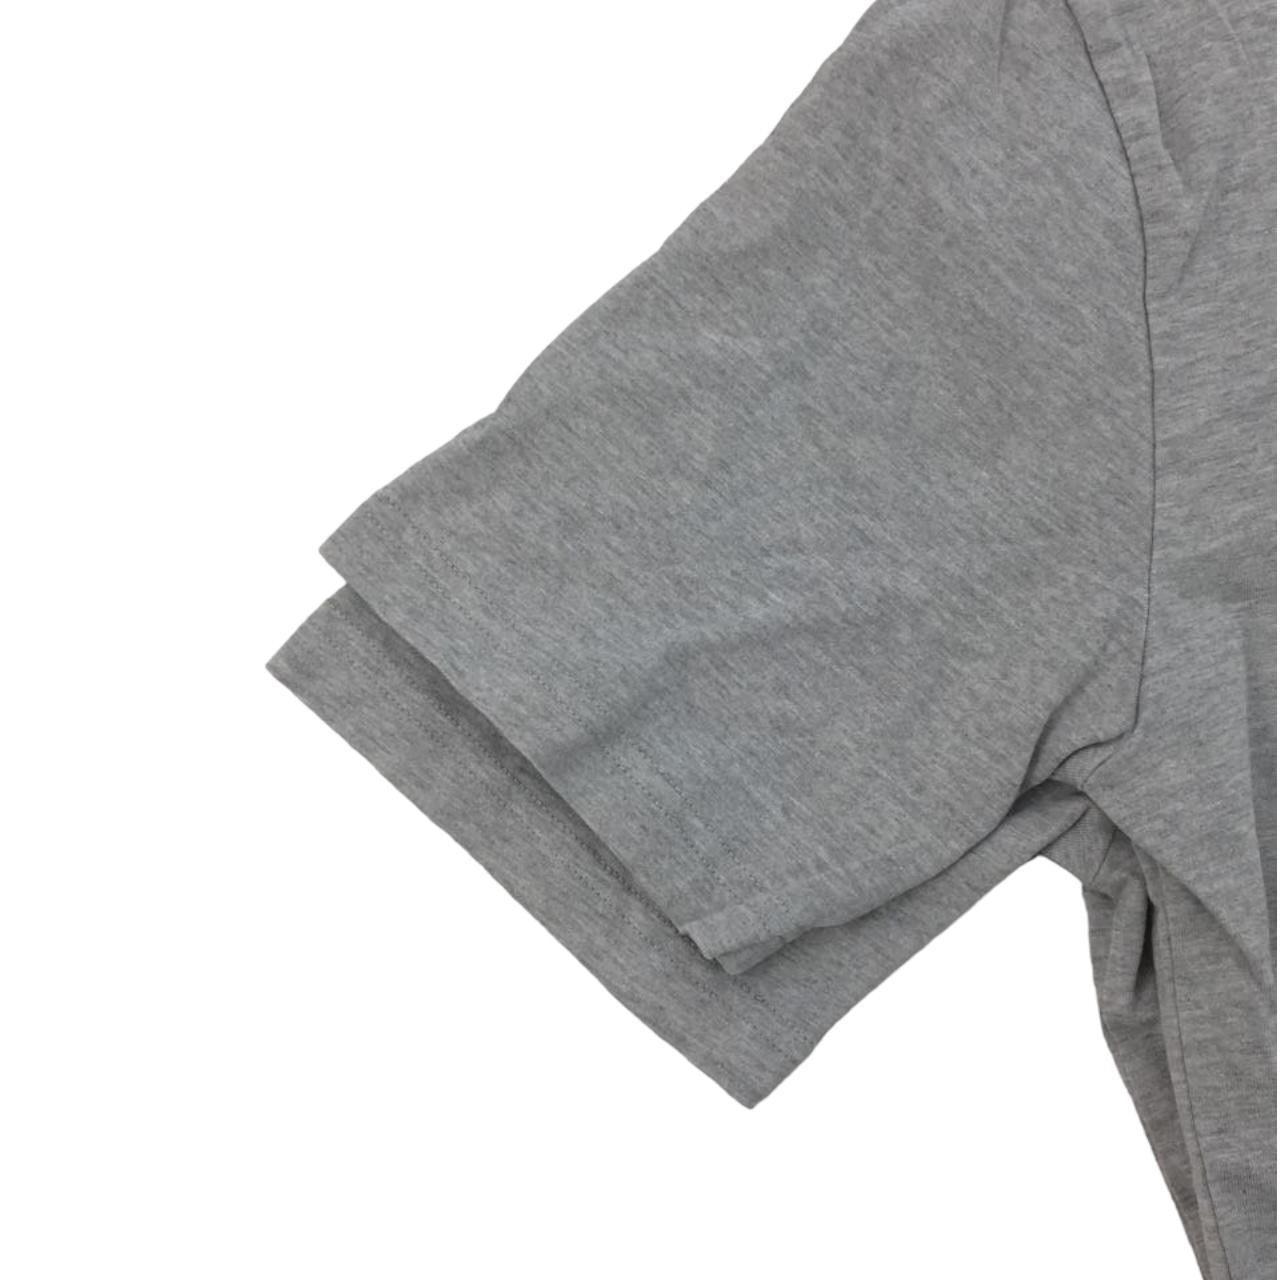 PALACE front Grey T-shirt - Known Source